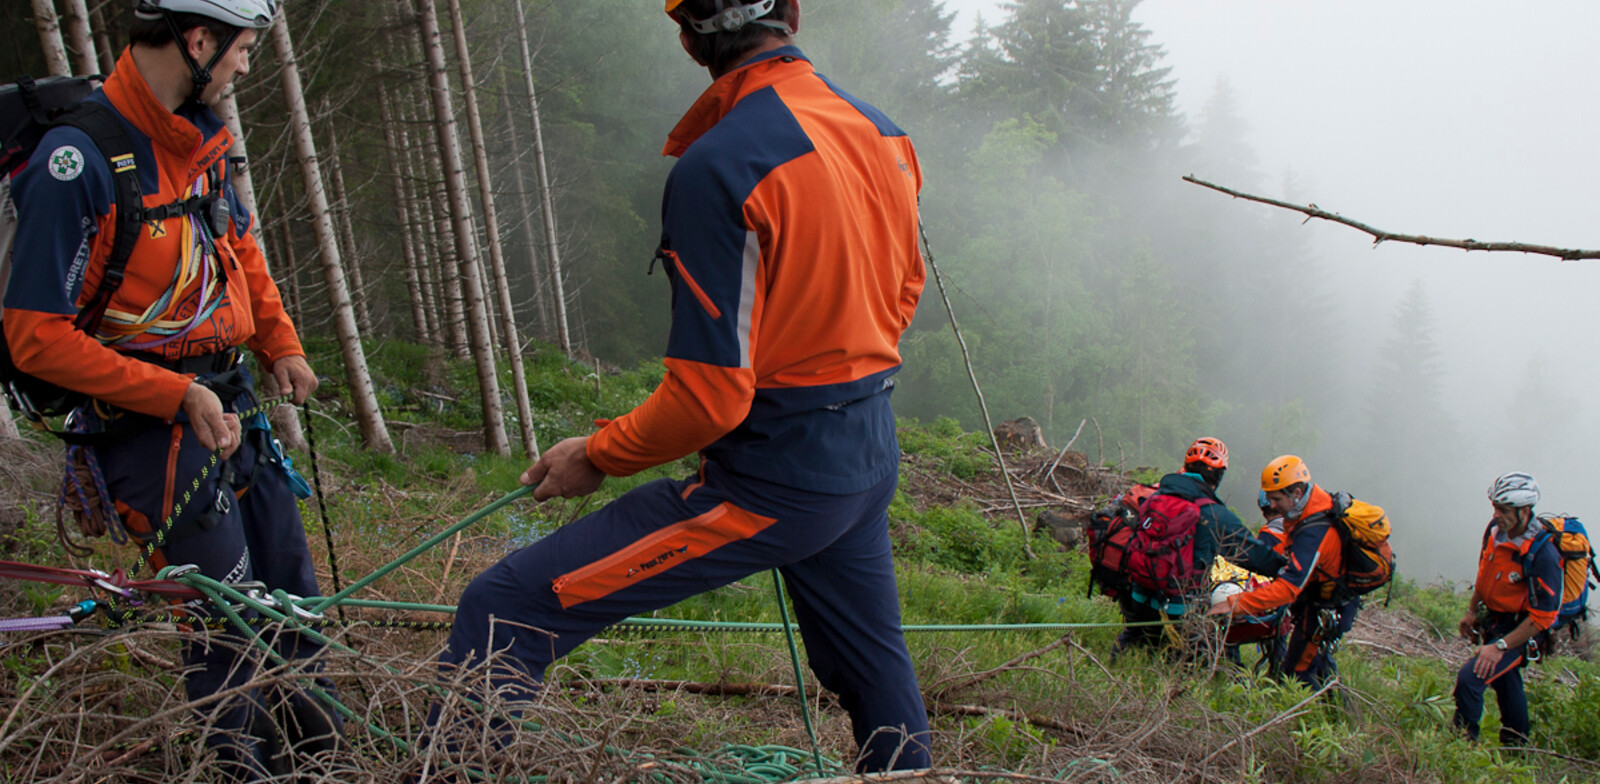 The rescue out of difficult terrain is being trained at the courses. | © c Bergrettung Salzburg